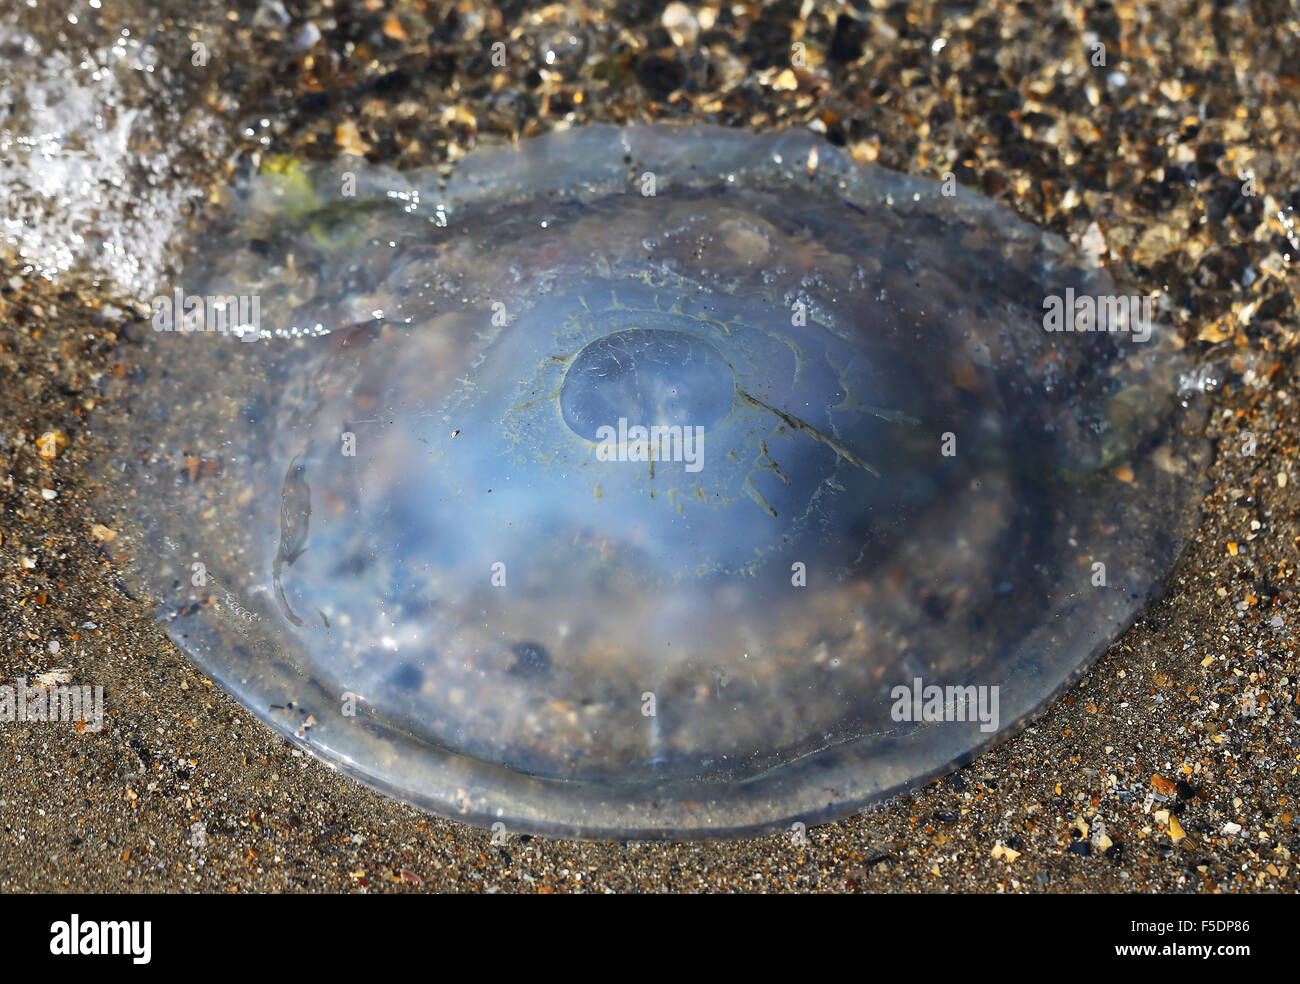 round jellyfish lying on the beach is photographed close-up Stock Photo